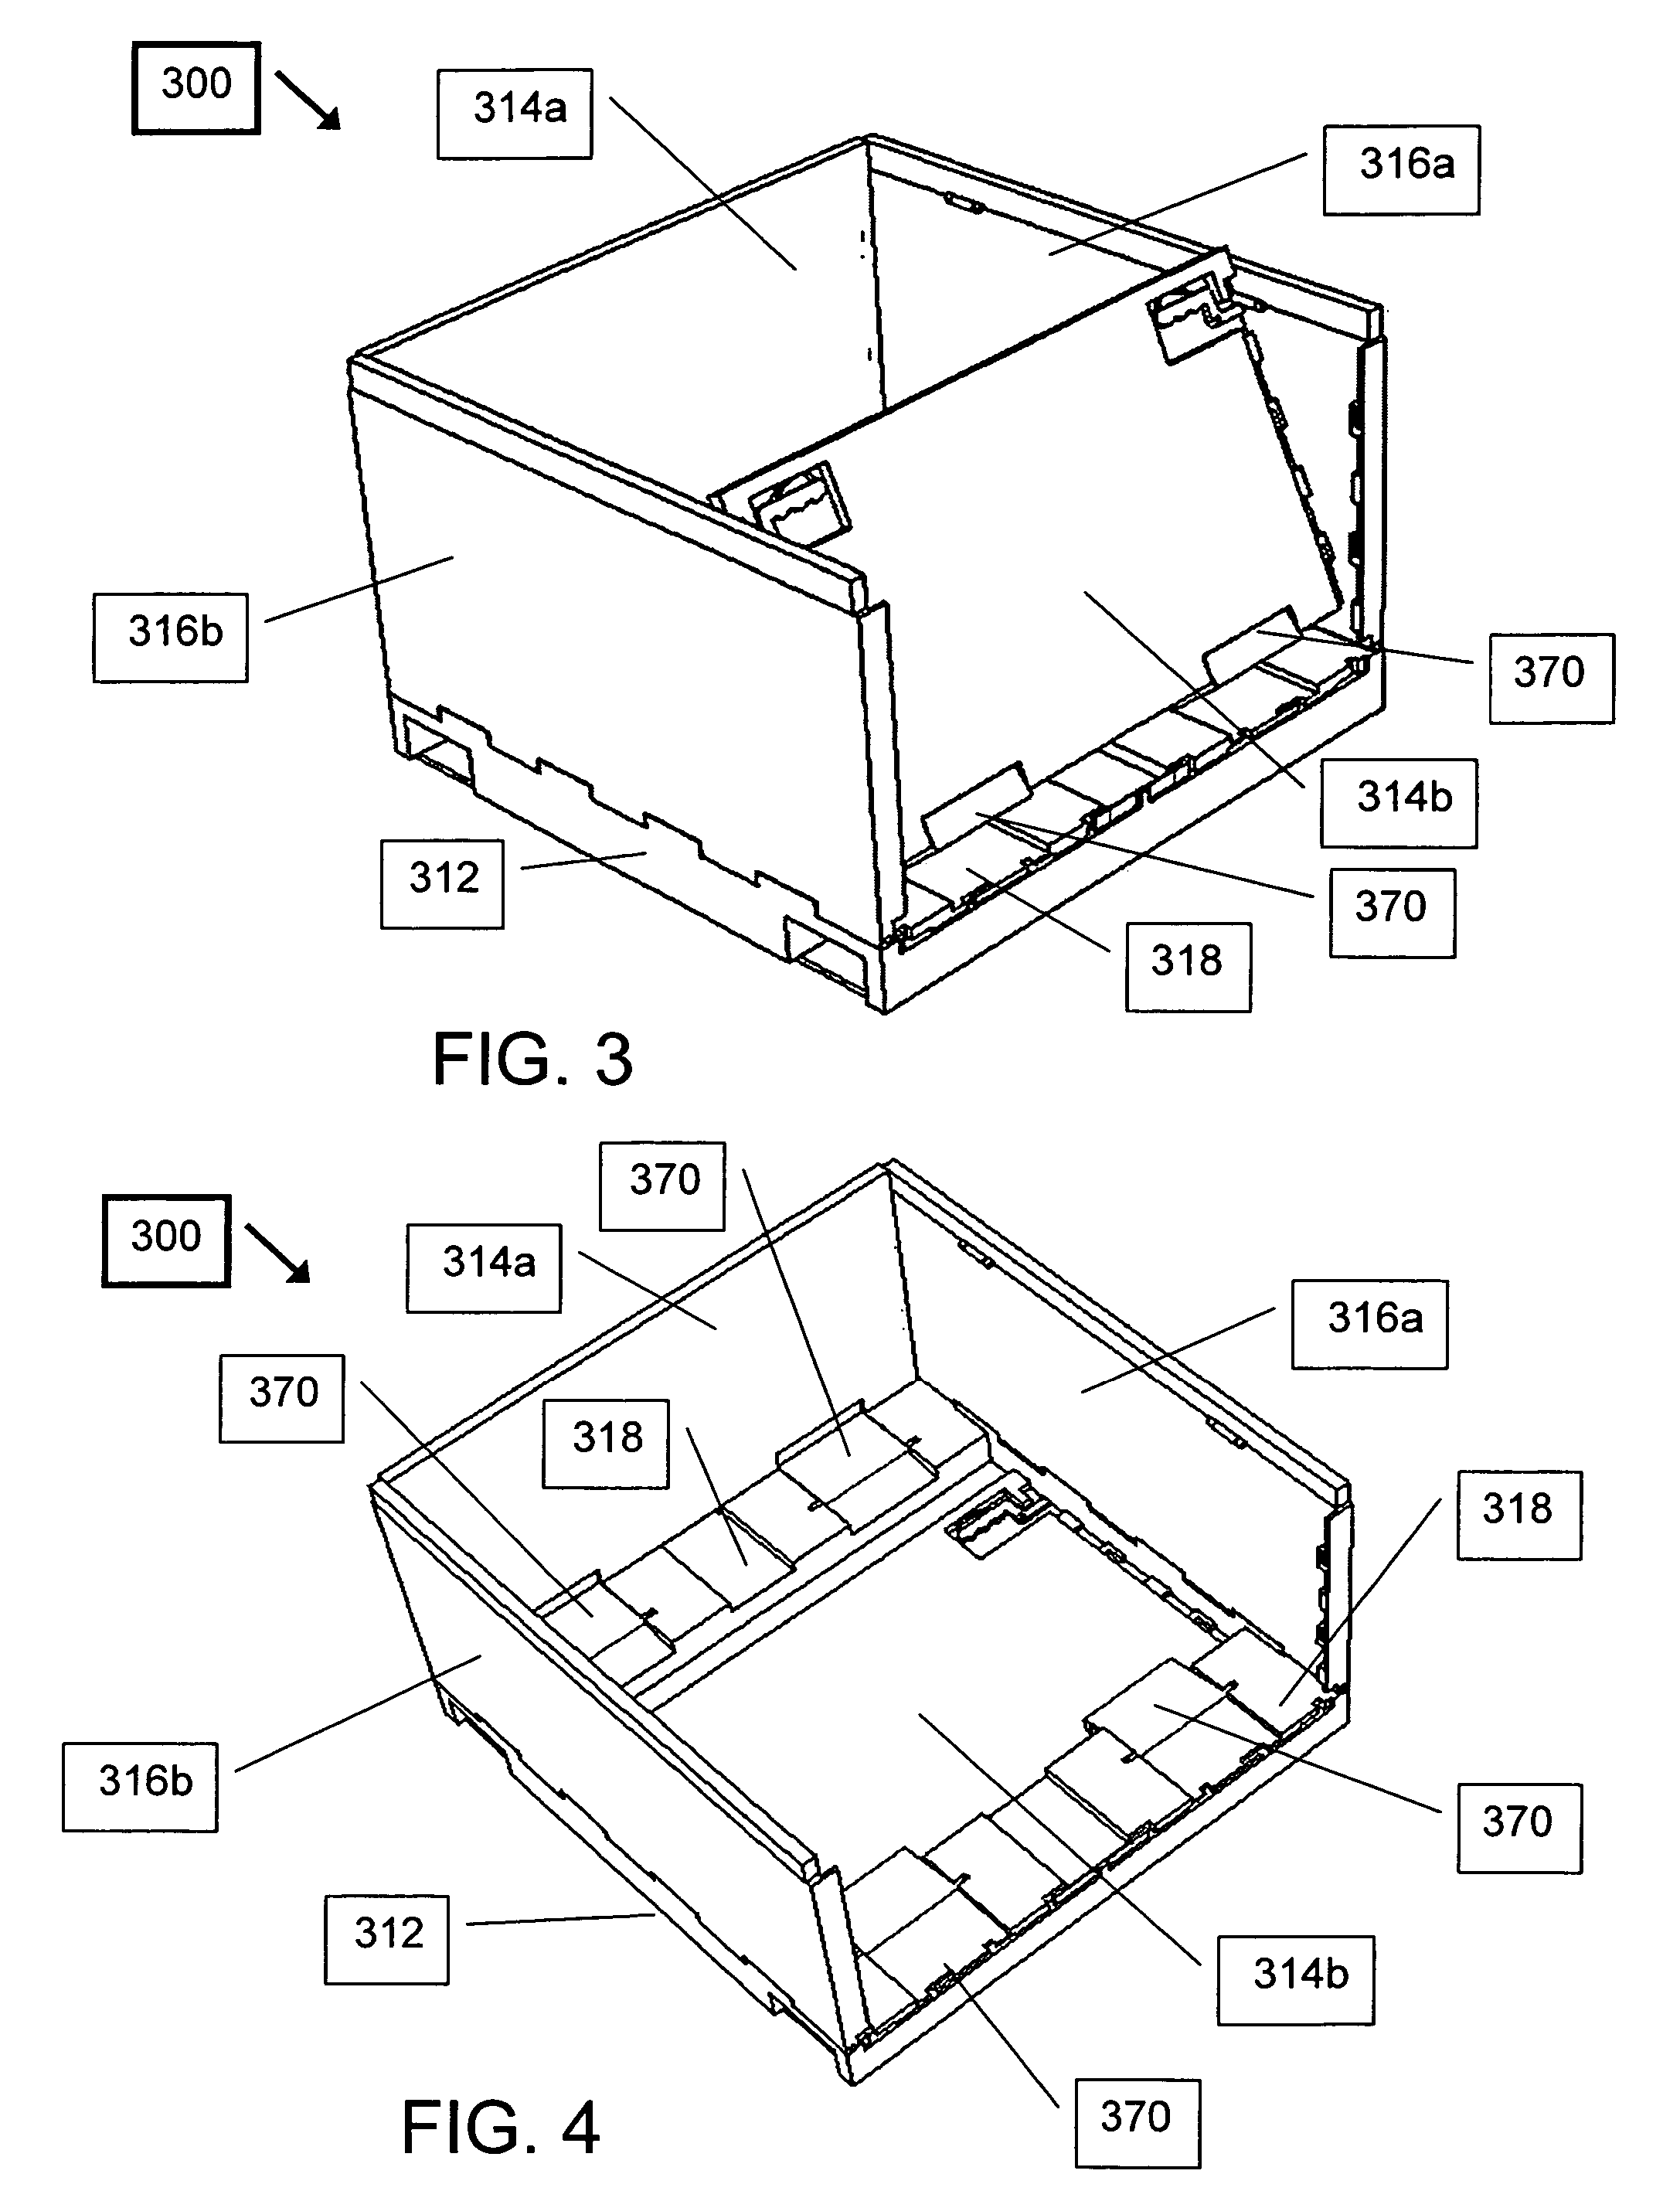 Knock-down crate with walls stored in base and method employing such a crate